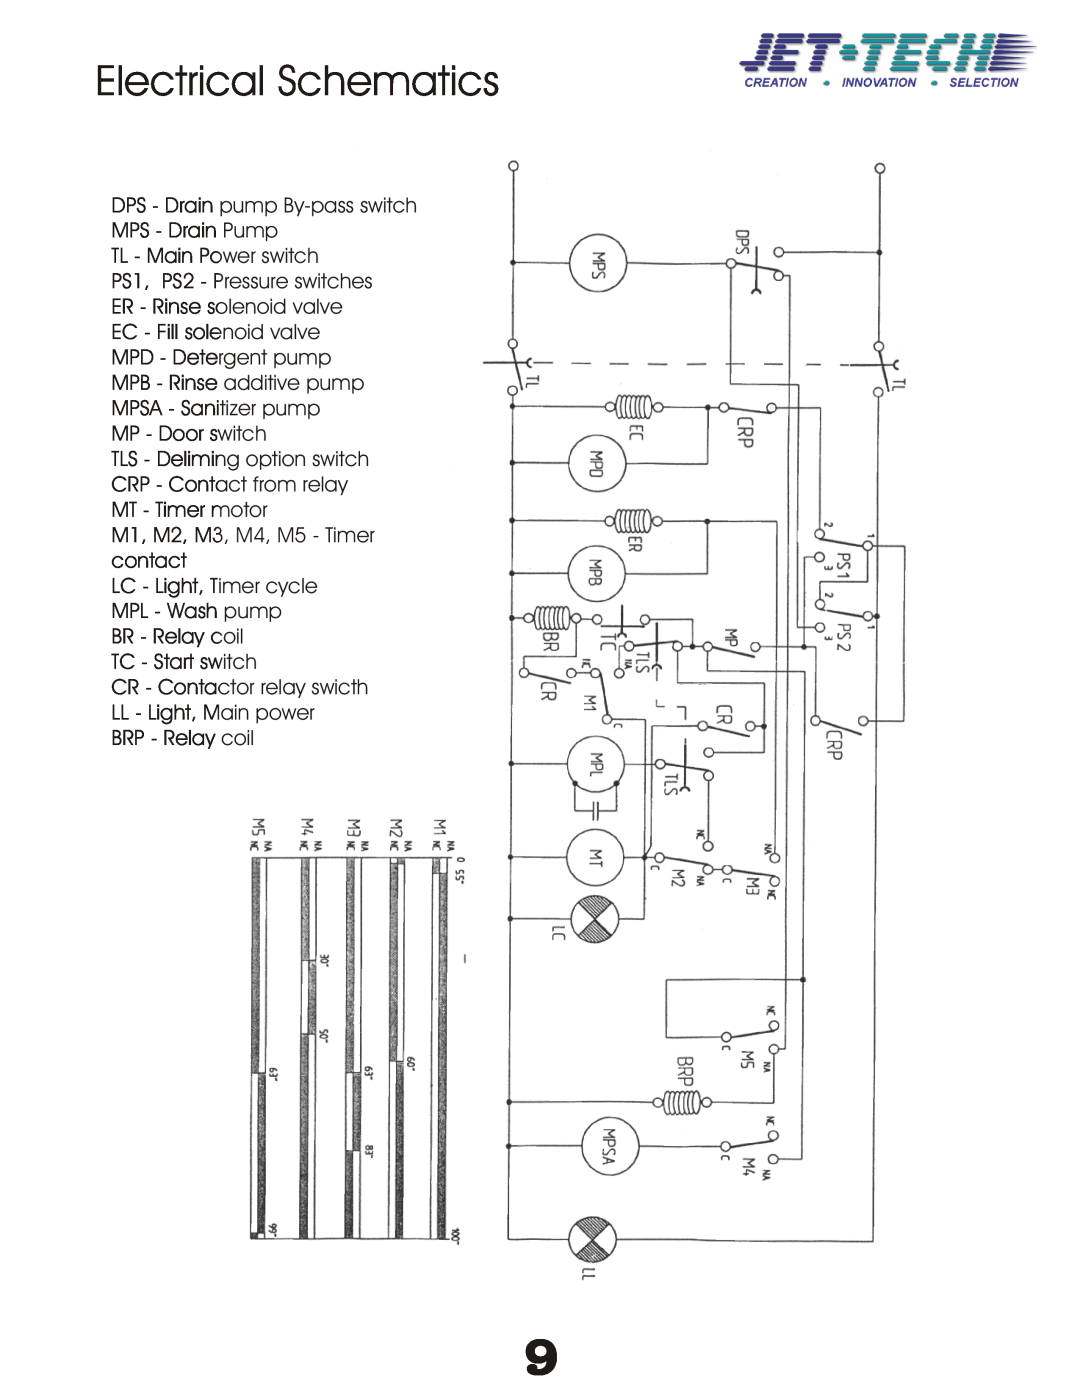 Jettech Metal Products X-32 technical manual Electrical Schematics 